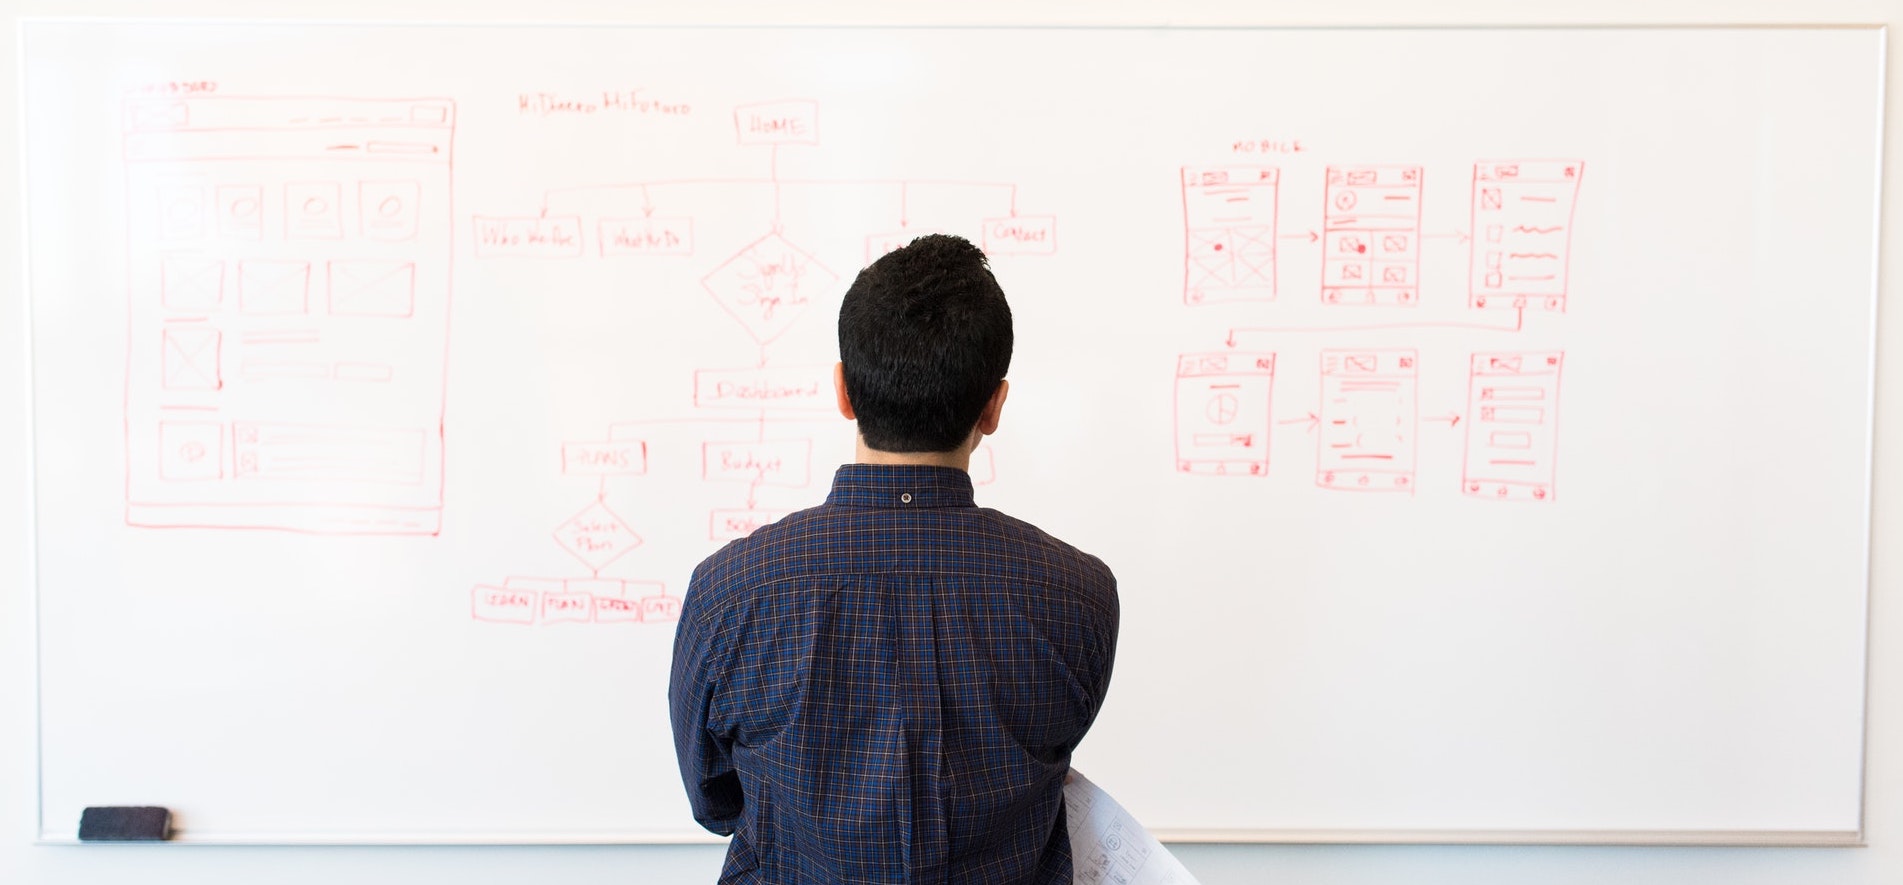 Image of a Man in Front of a Whiteboard with a Plan Structure